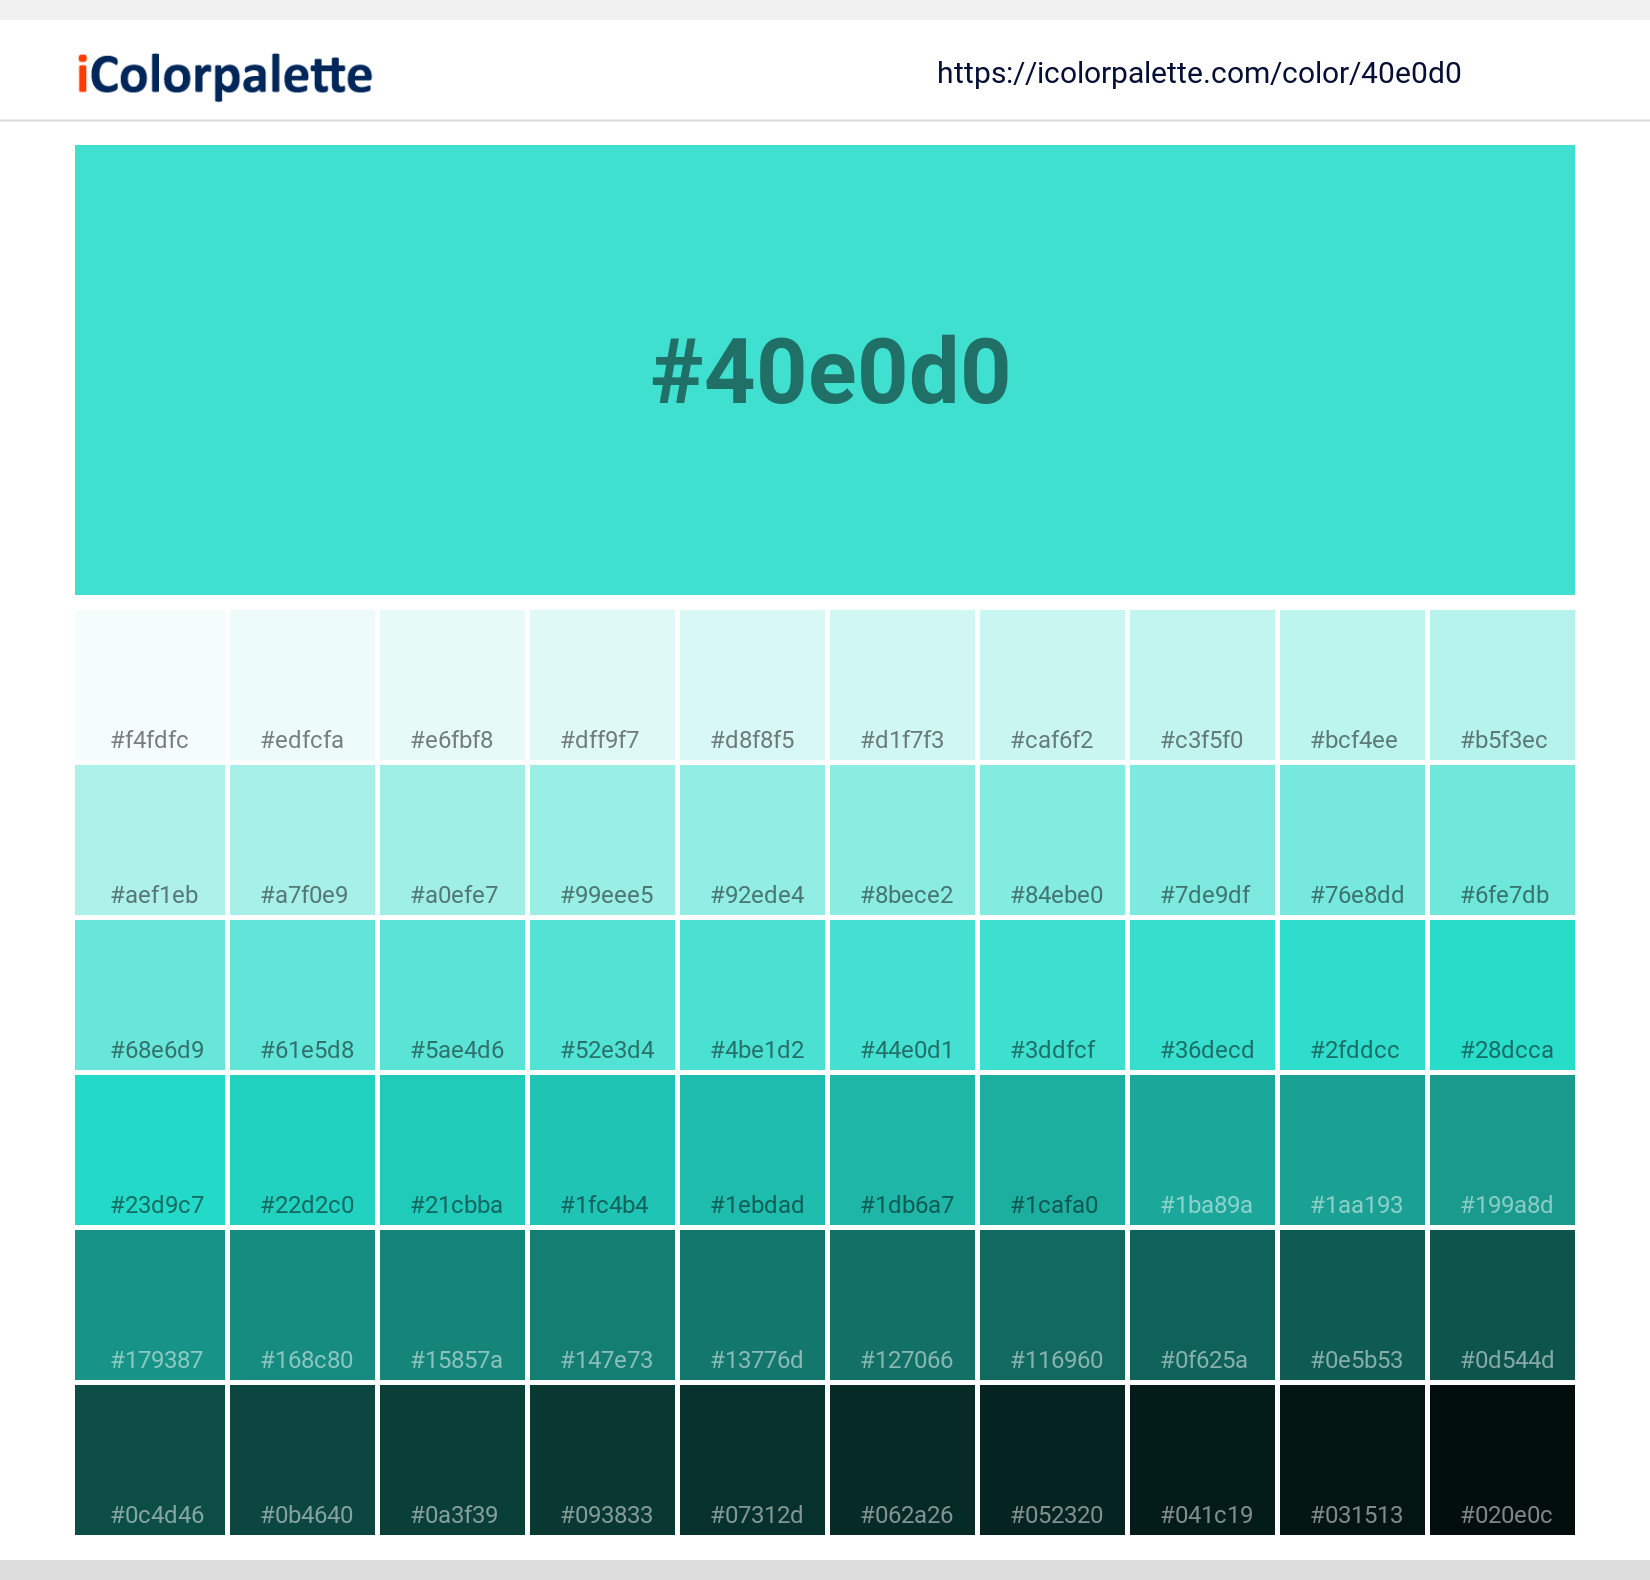 Turquoise Color - HEX #40E0D0 Meaning and Live Previews - PaletteMaker